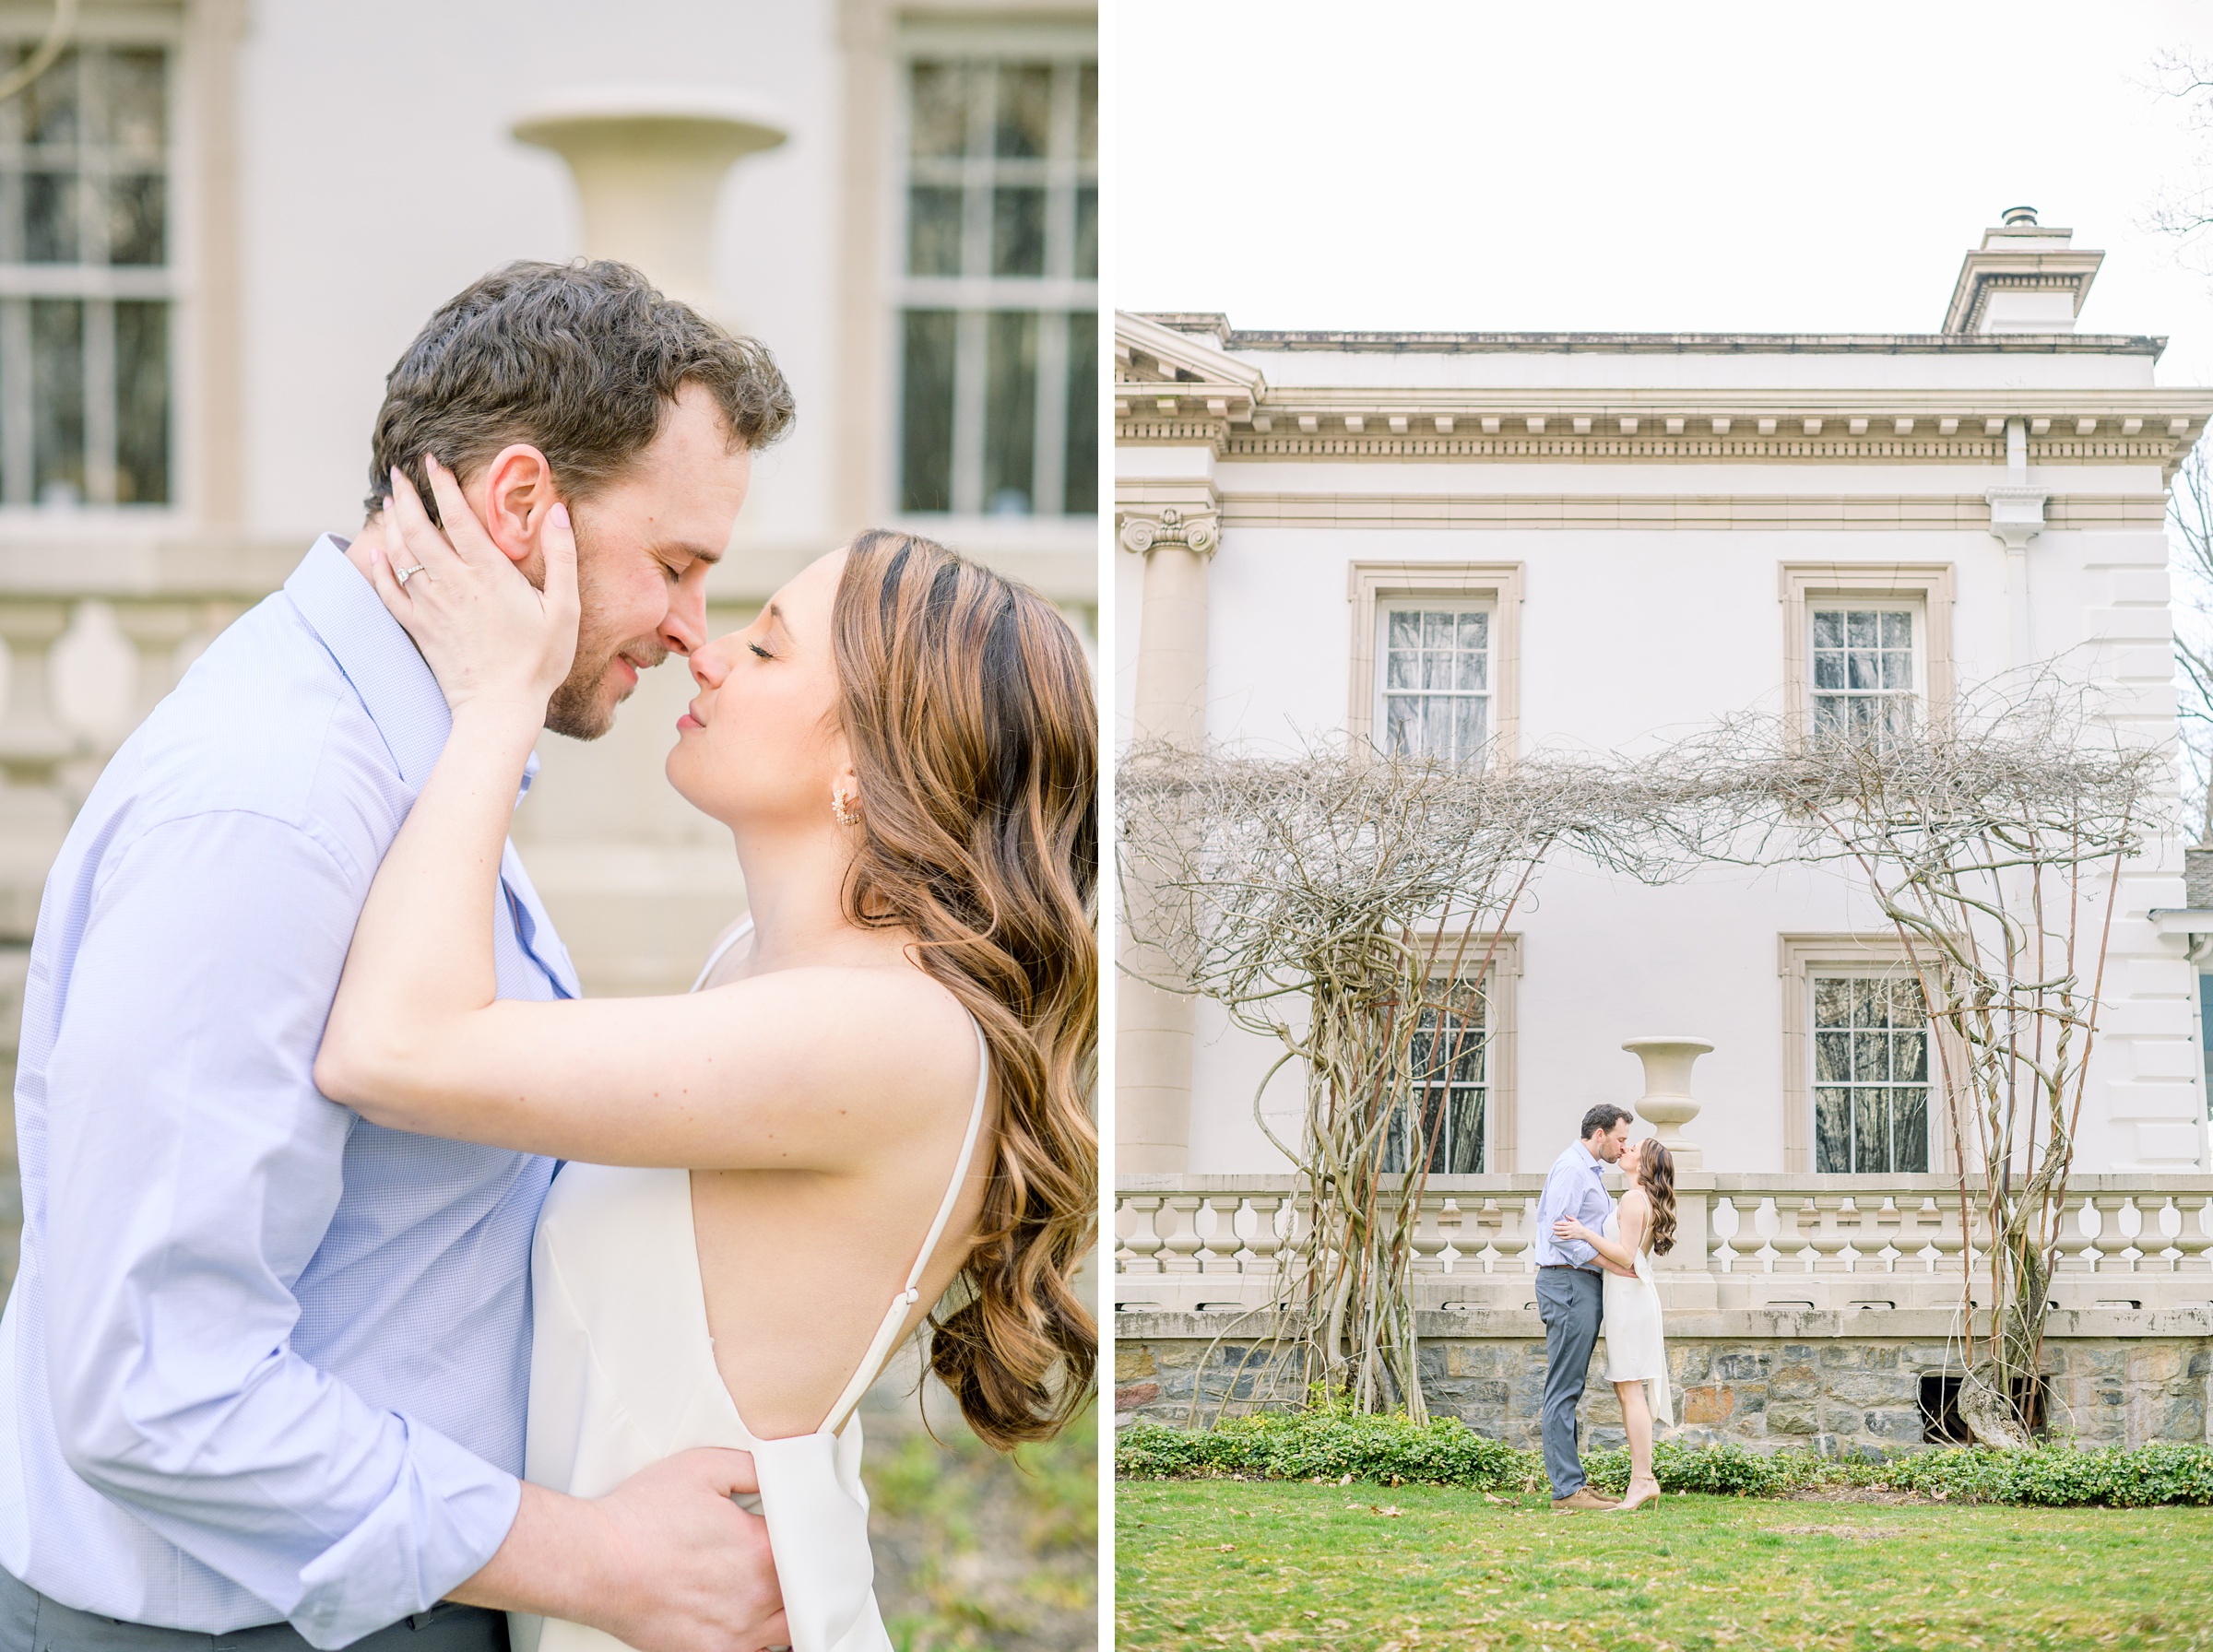 Engaged couple at Liriodendron Mansion in Bel Air, Maryland for their engagement session photographed by Baltimore Wedding Photographer Cait Kramer Photography